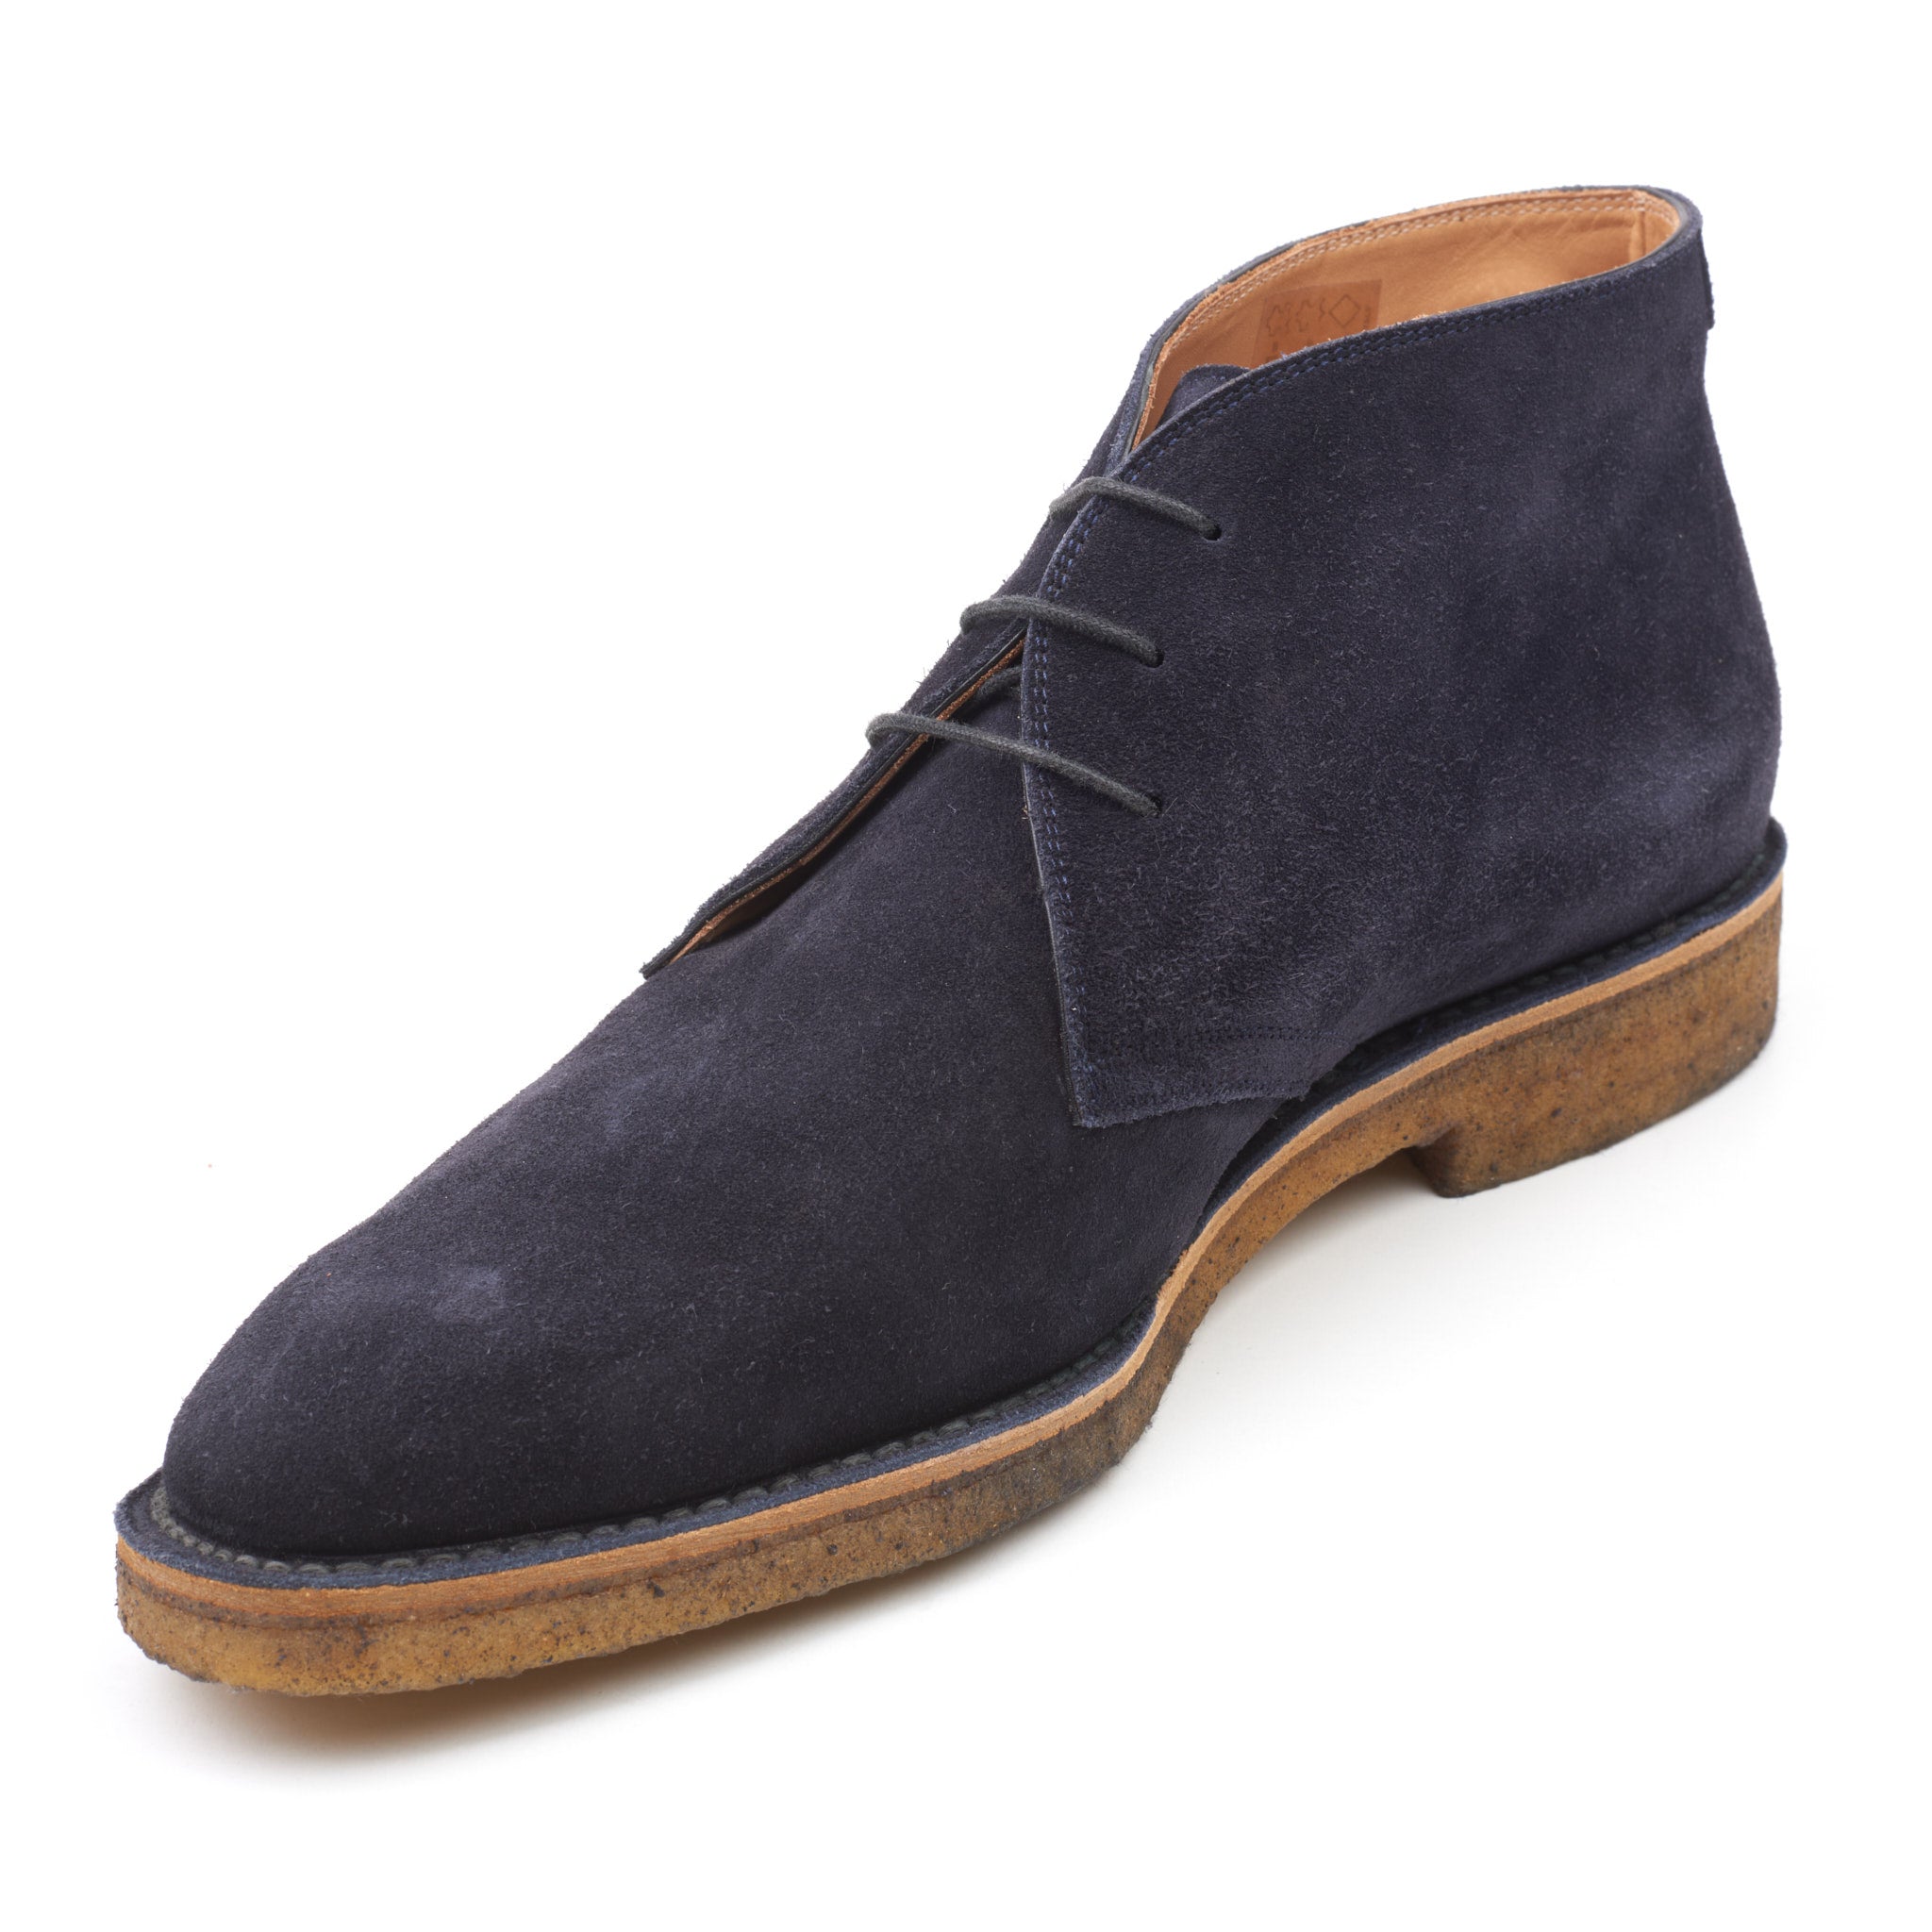 KITON Blue Suede Leather 3 Eyelet Ankle Chukka Boots Shoes NEW with Box KITON